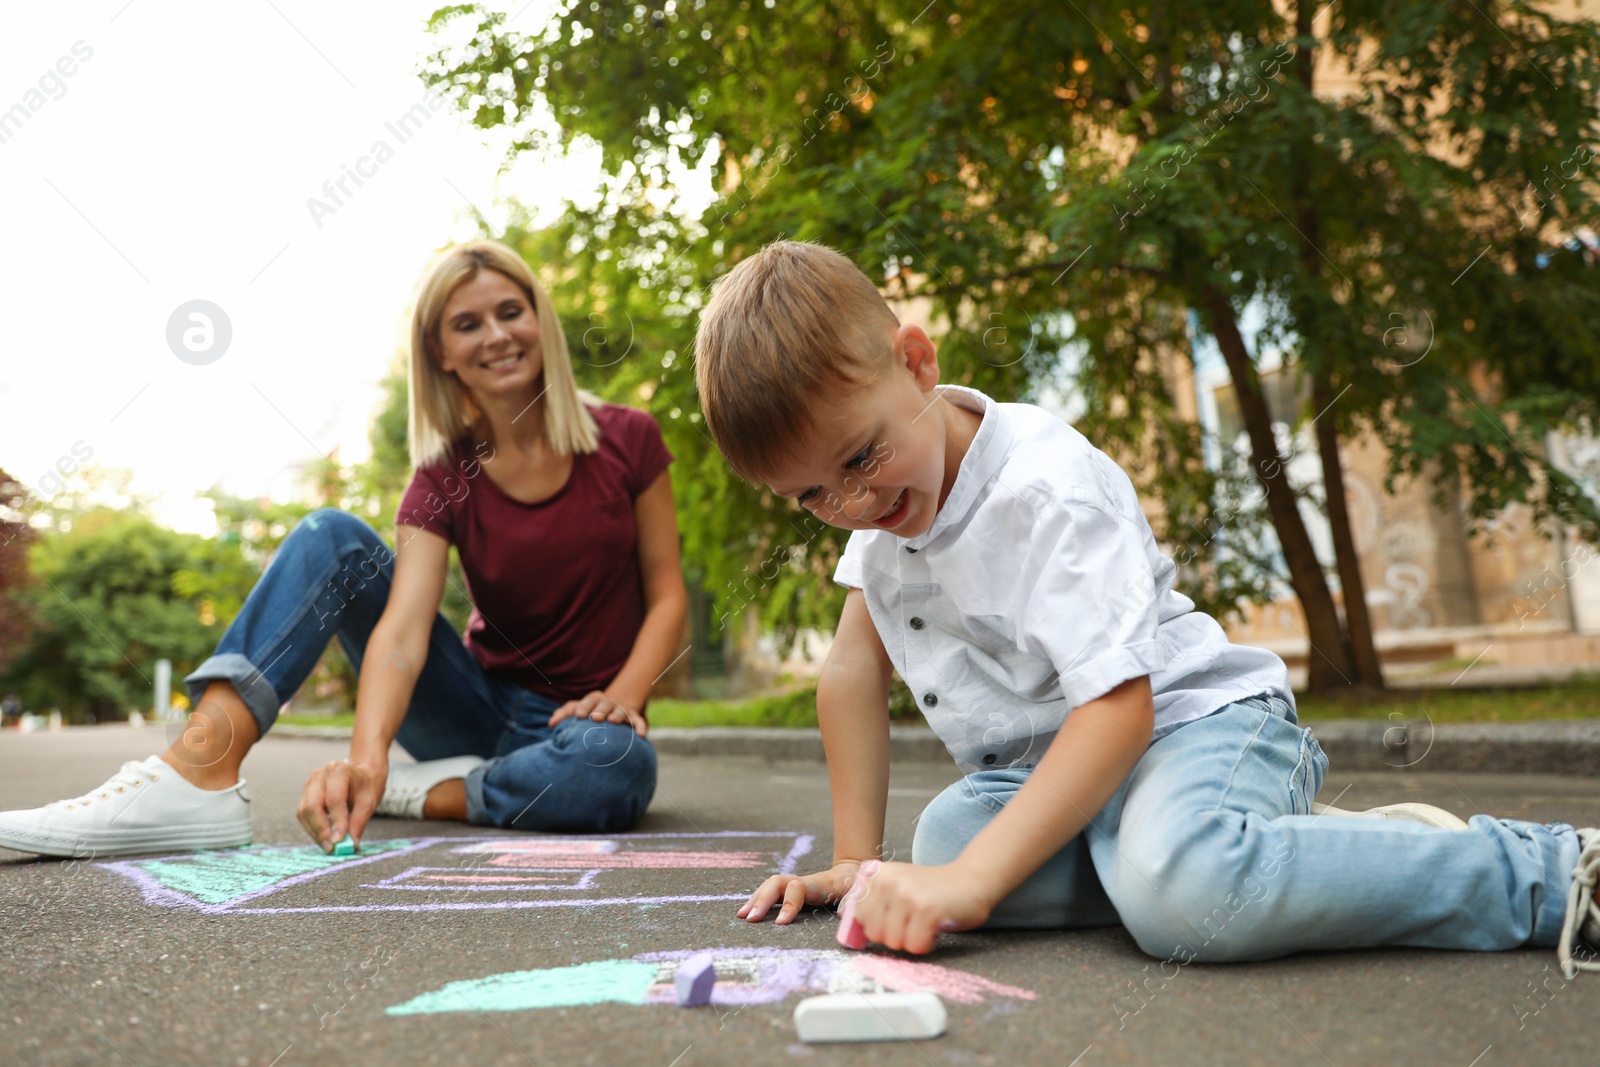 Photo of Nanny with cute little boy drawing house with chalks on asphalt